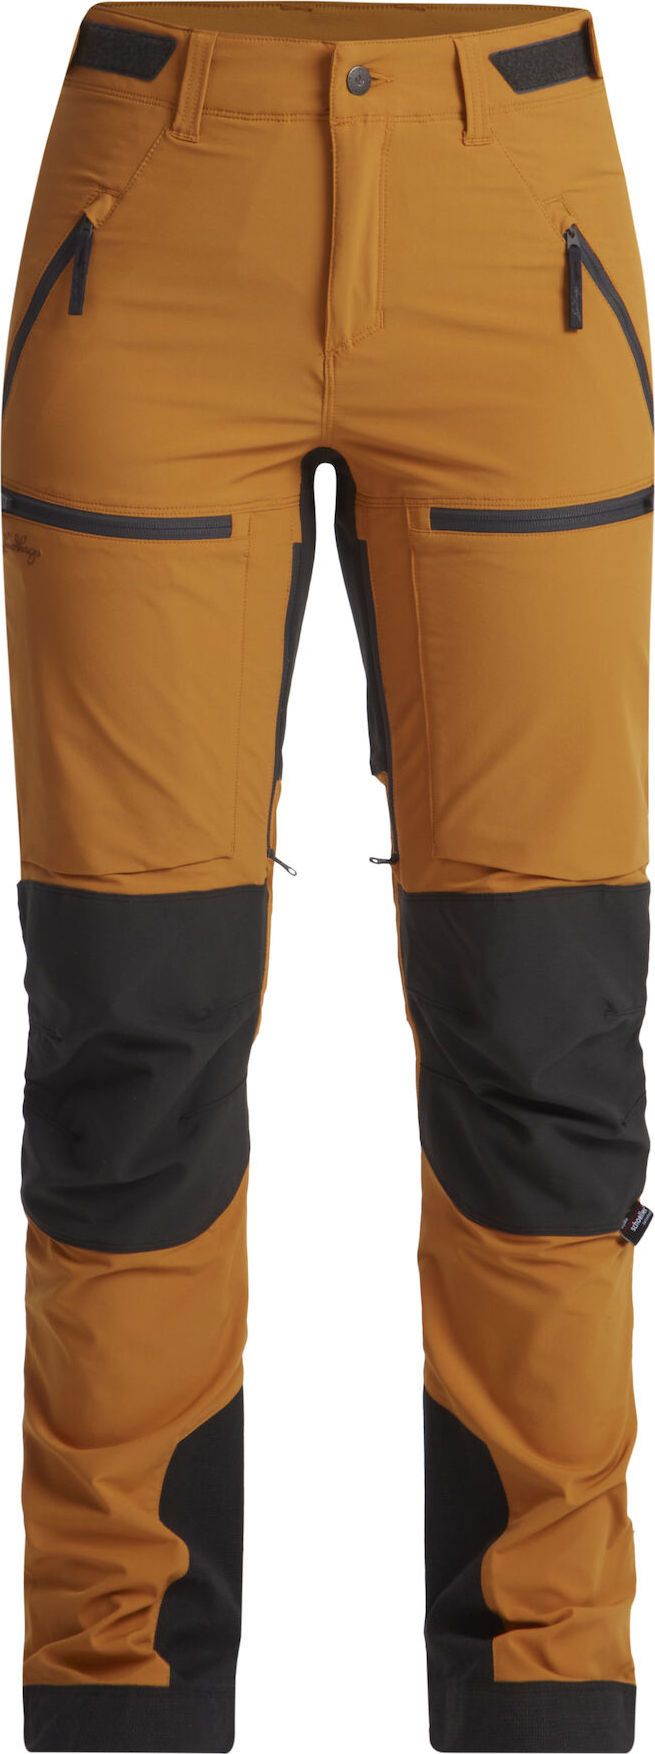 Lundhags Women's Askro Pro Pant Gold/Charcoal